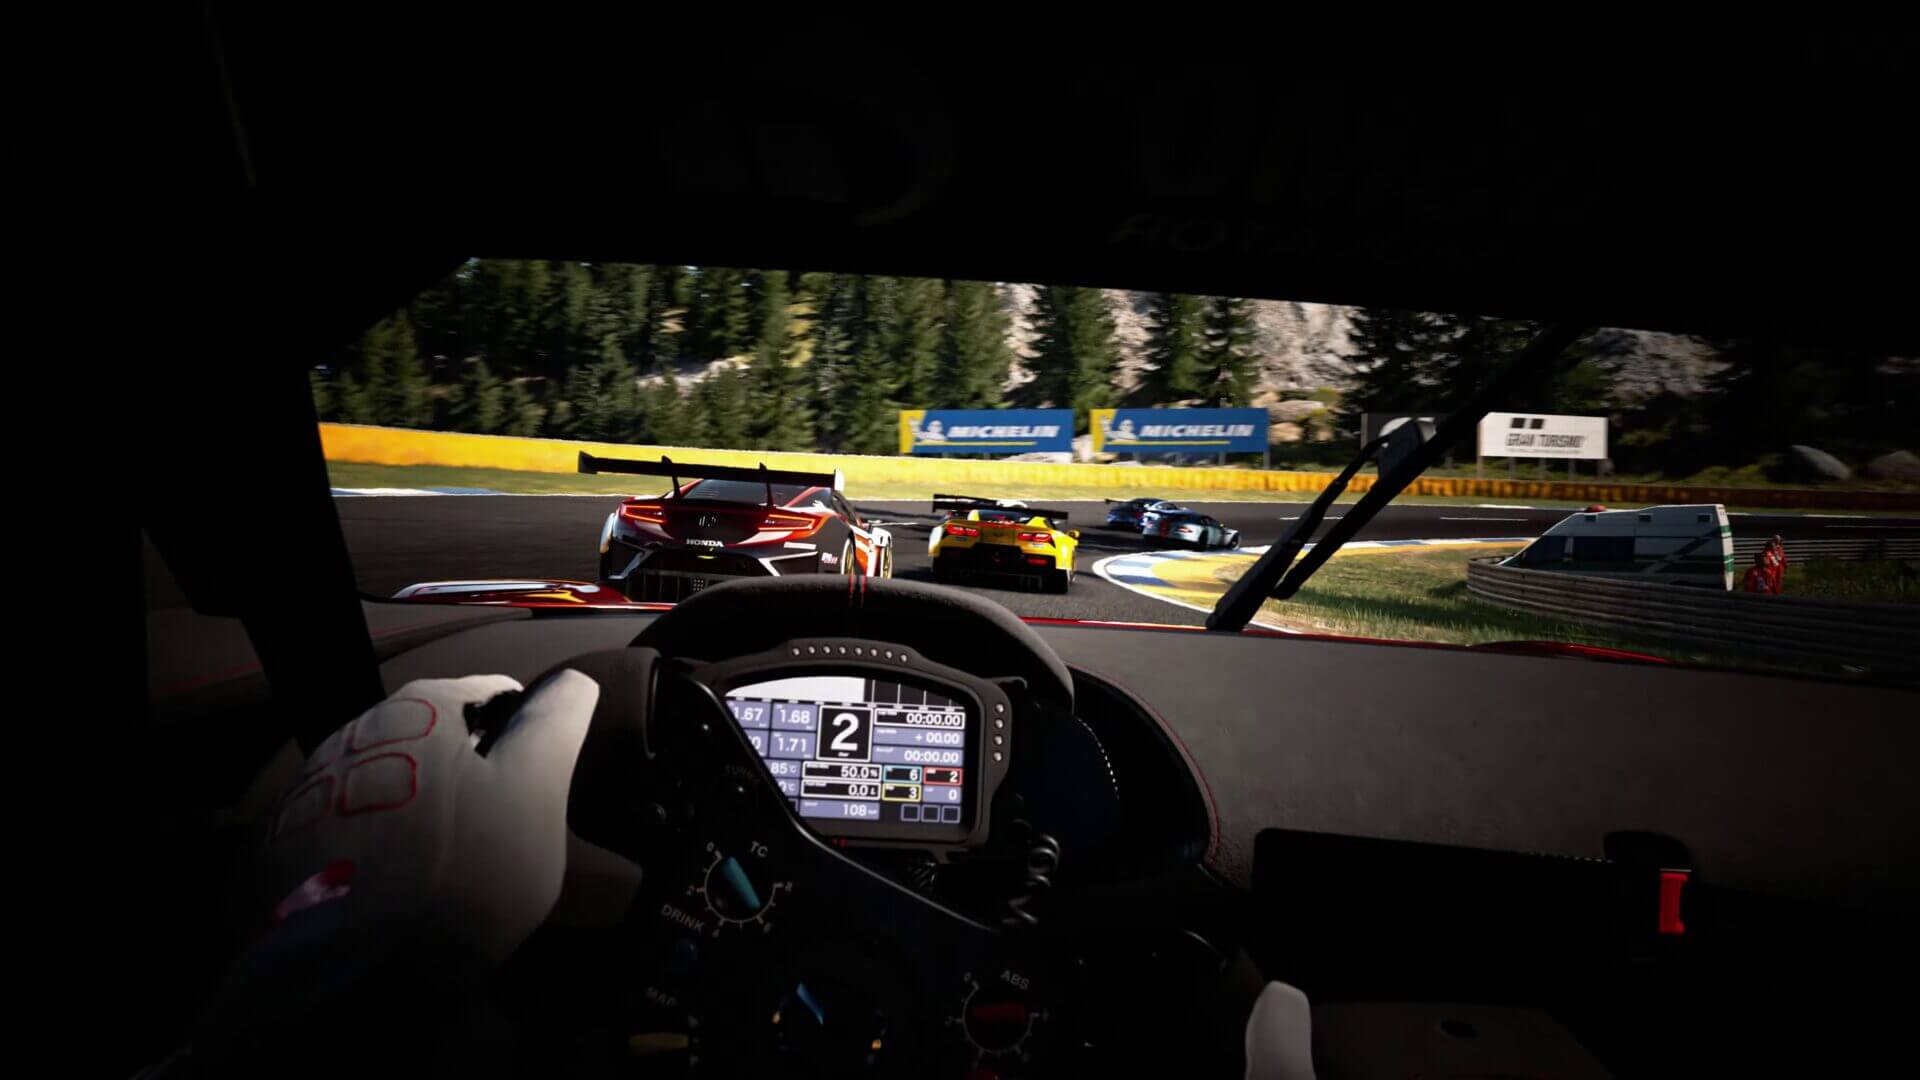 Gran Turismo film delves into whether video game car racers are